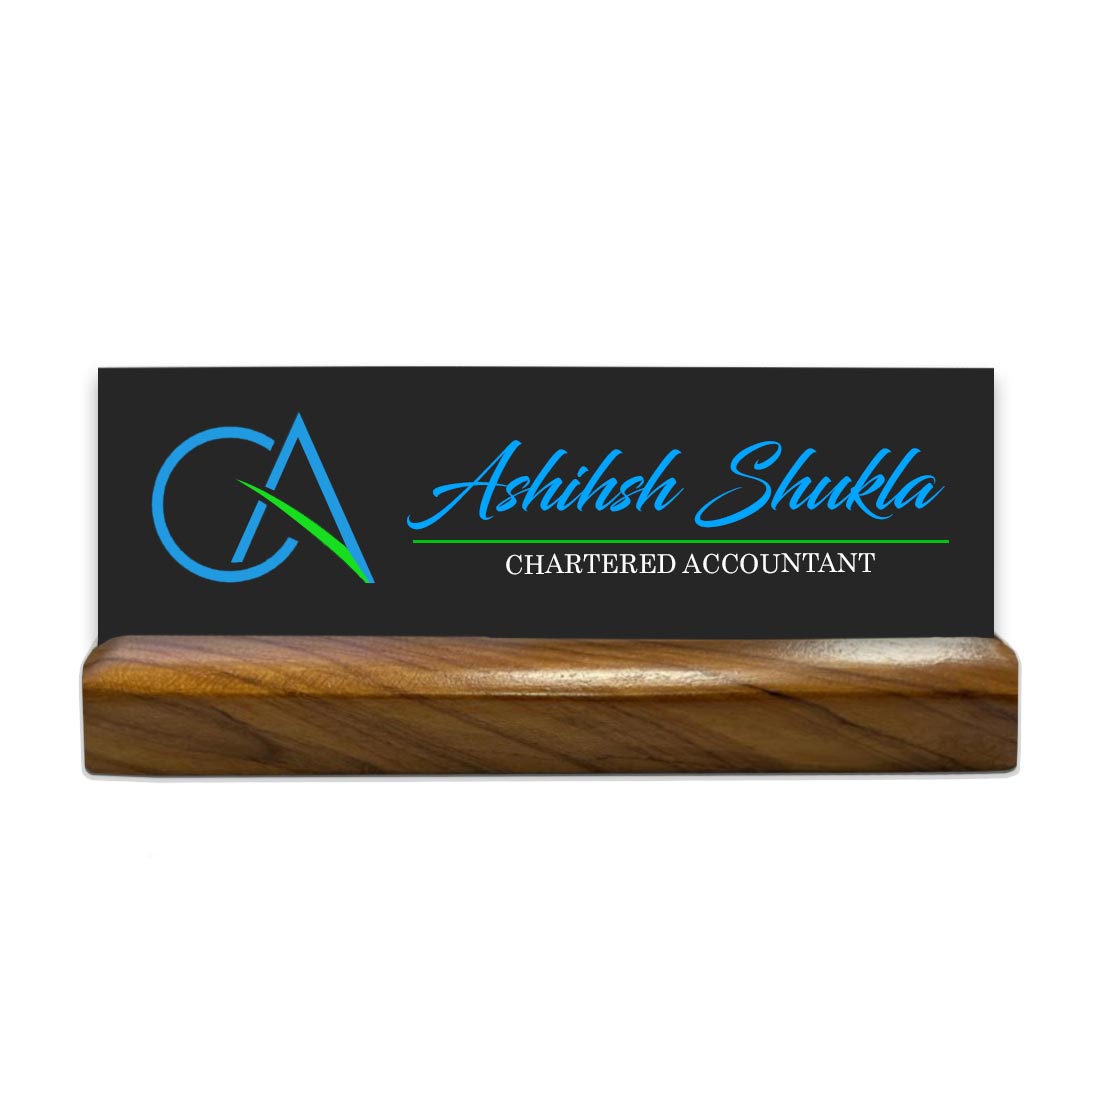 Personalised Desk Name Plate for CA Wooden Table Nameplate - Chartered Accountant